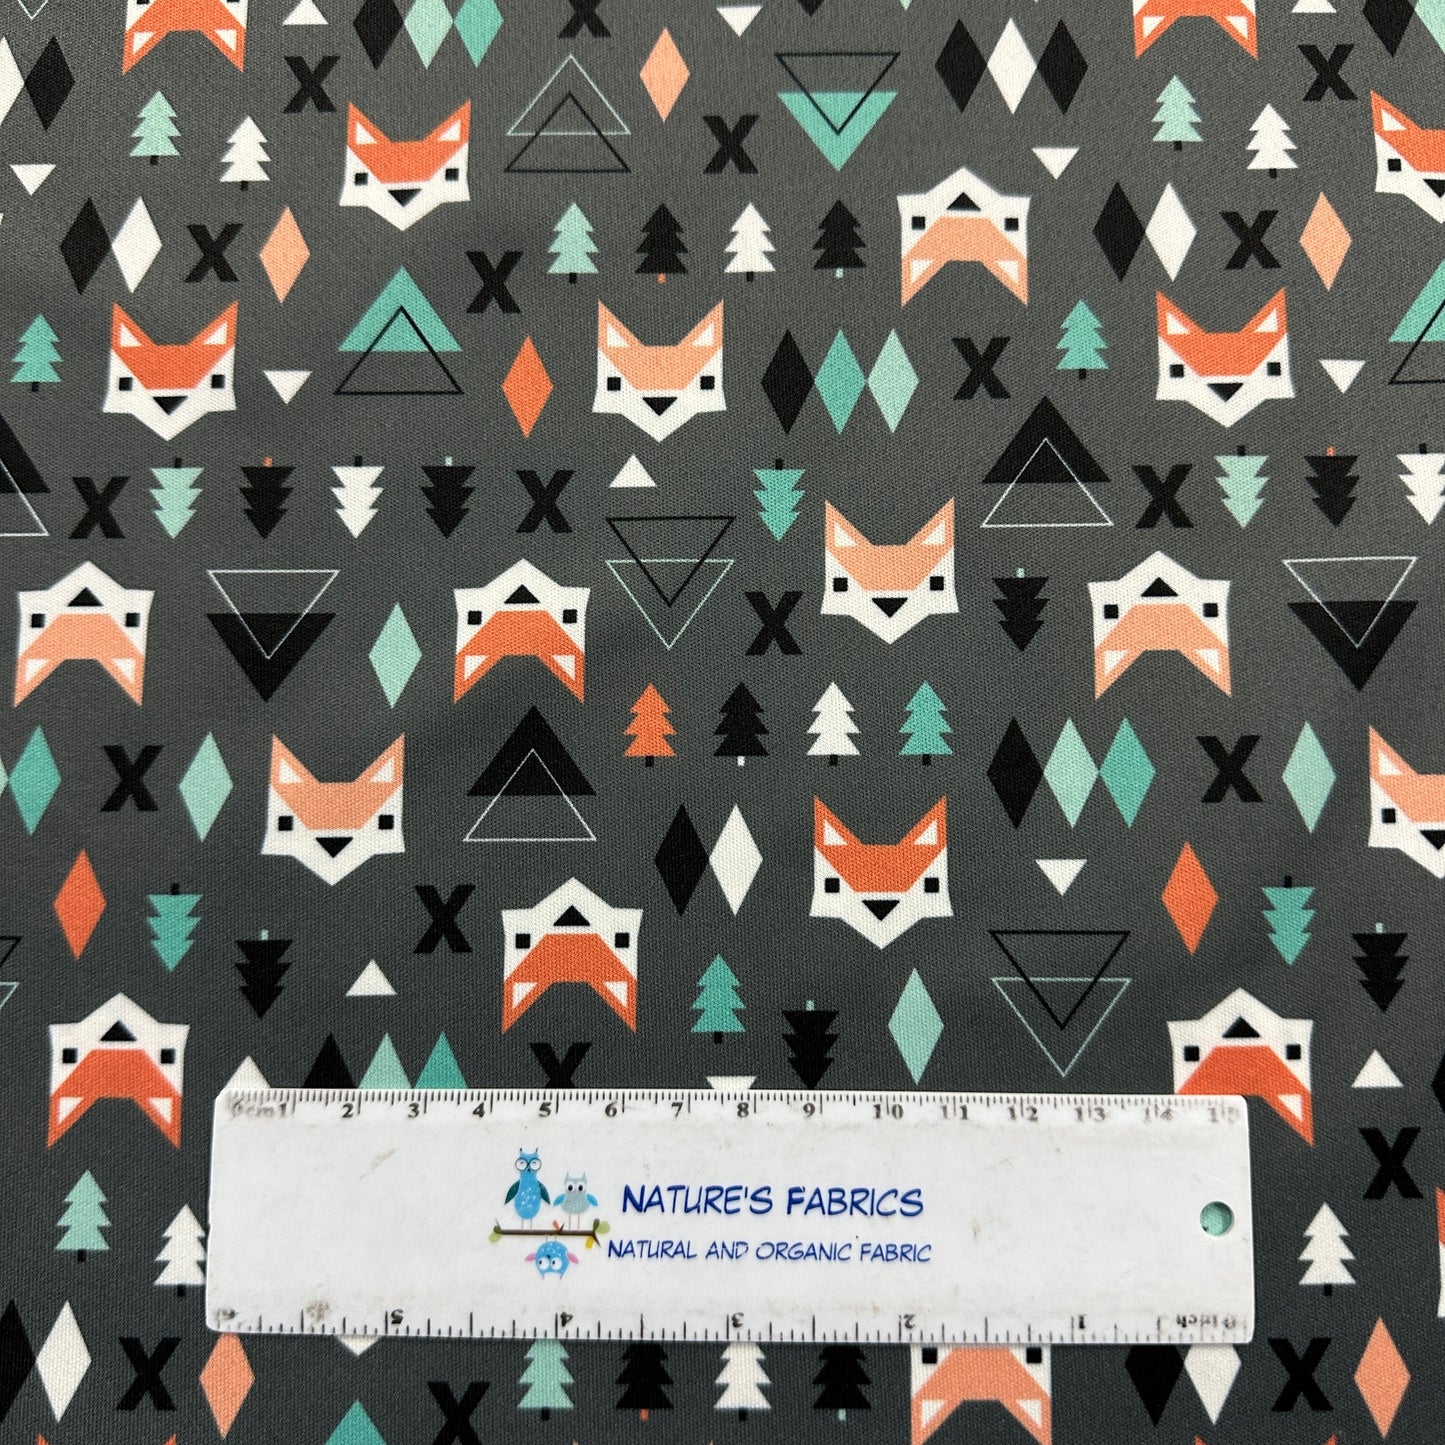 Foxes and Triangles 1 mil PUL Fabric - Made in the USA